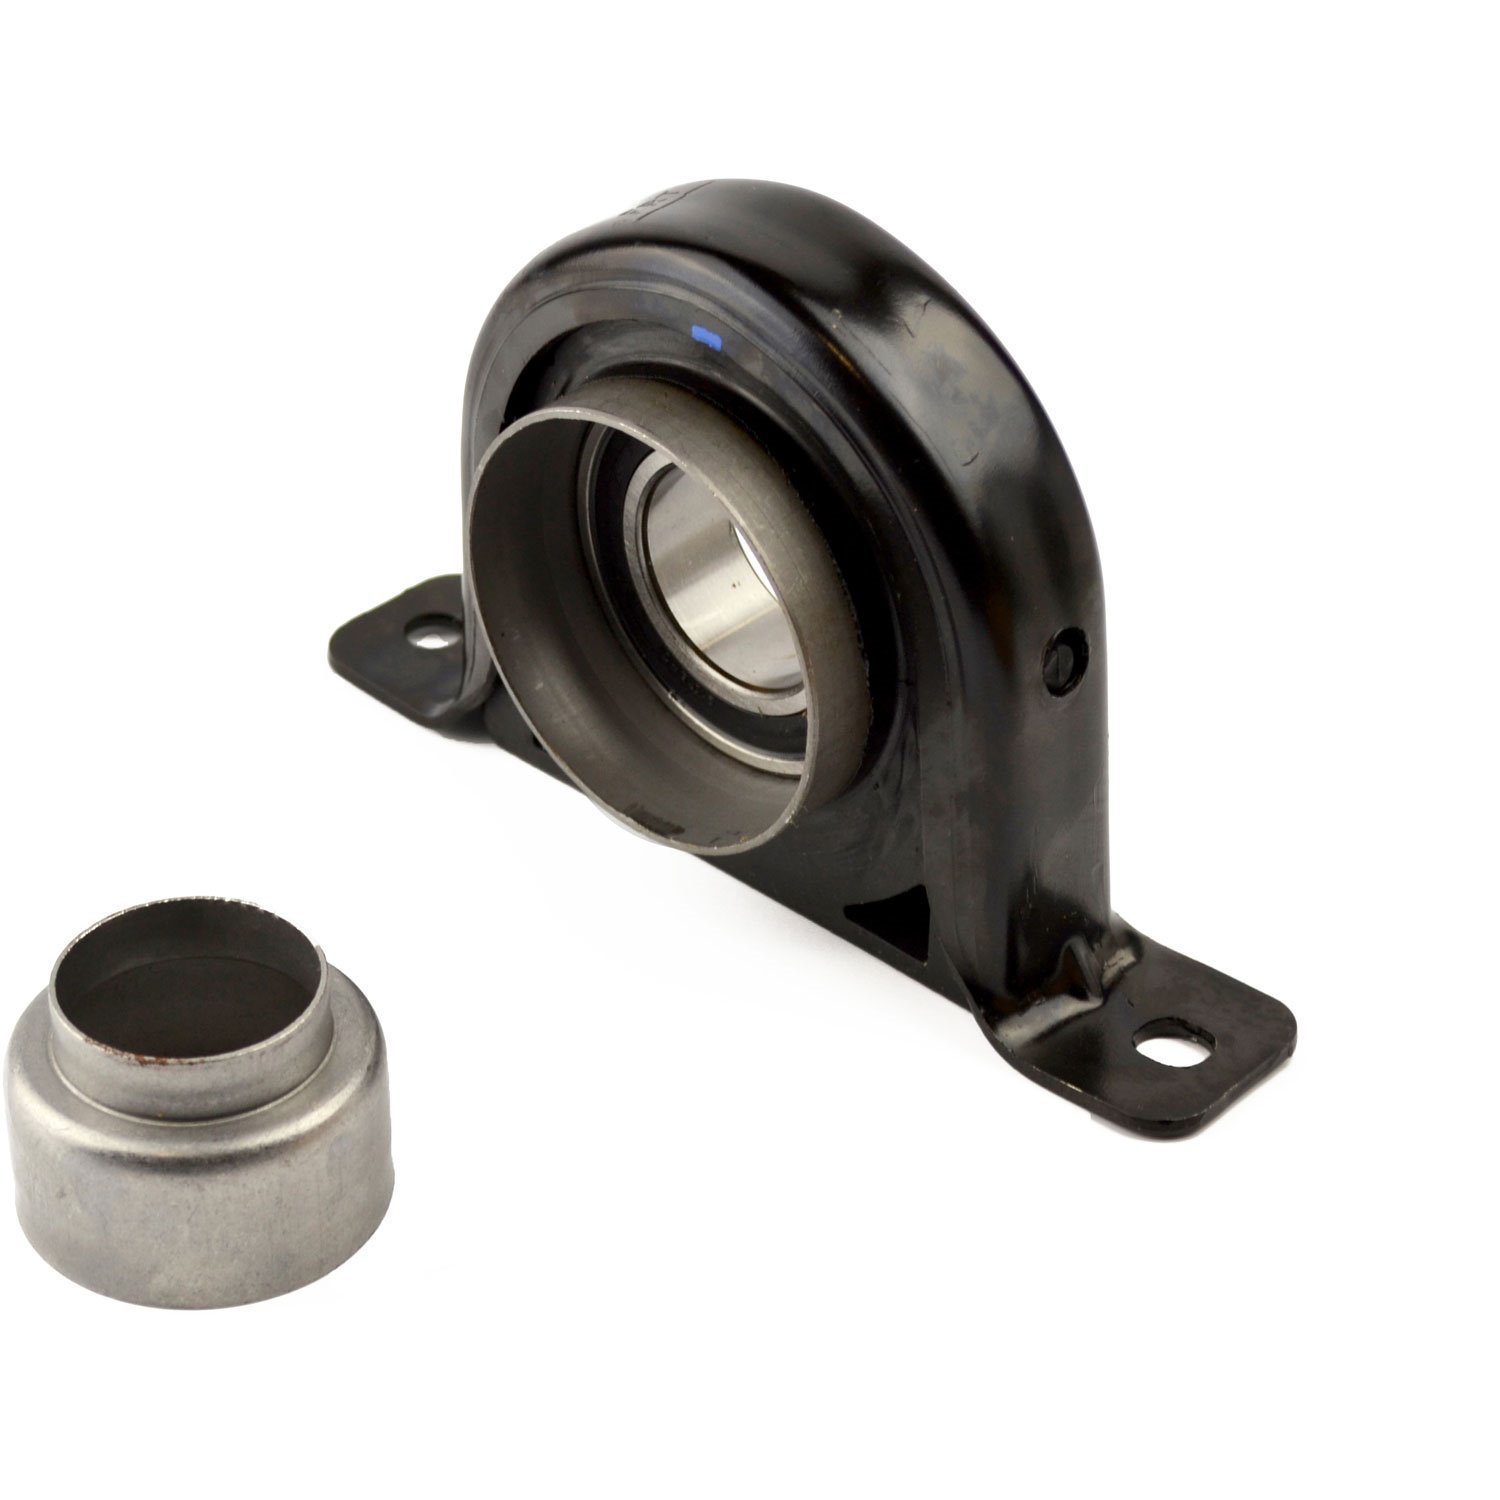 Center Support Bearing ID (A) = 1.574"